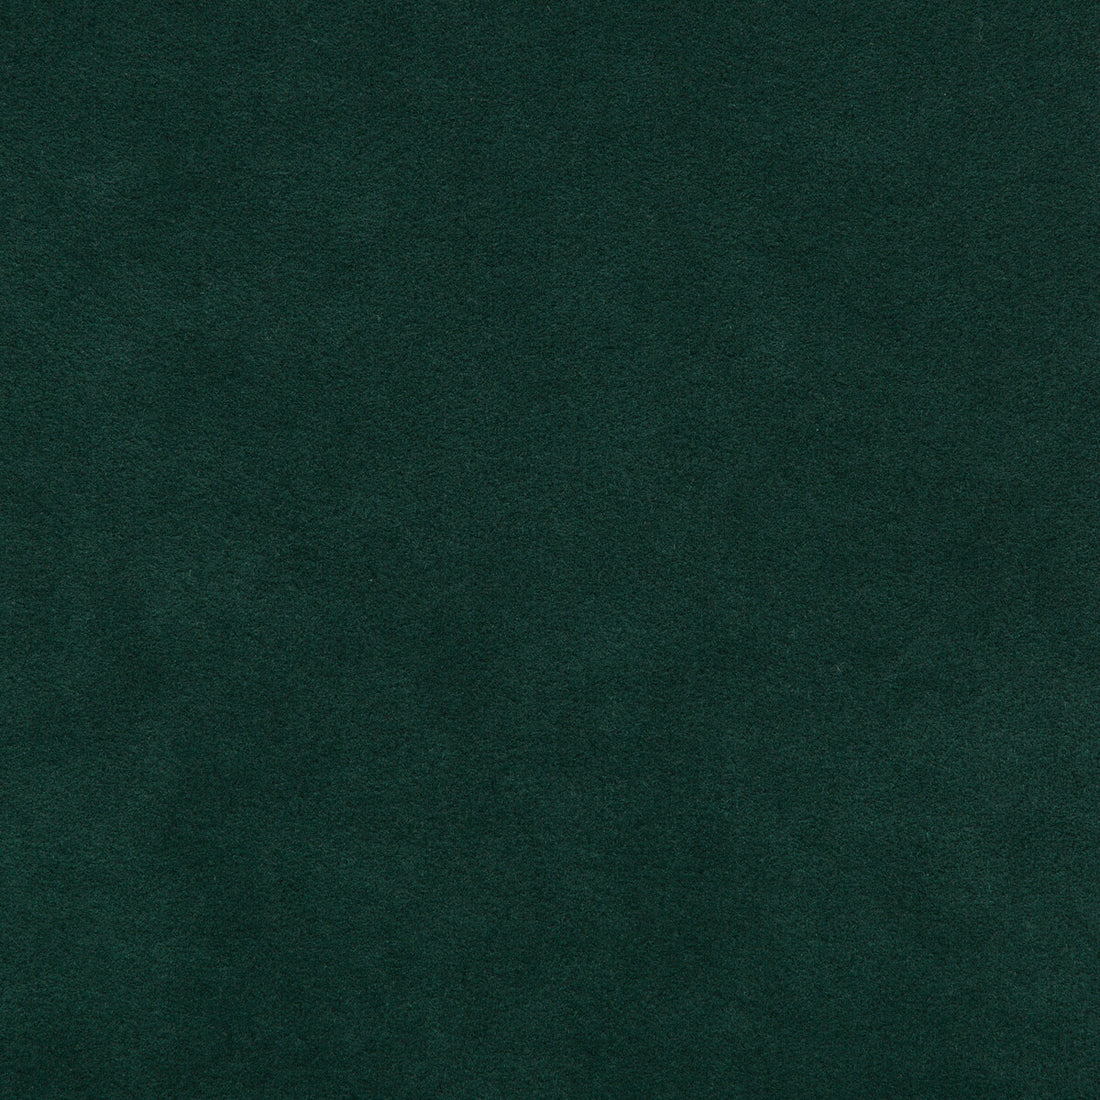 Ultrasuede Green fabric in pine color - pattern 30787.5353.0 - by Kravet Design in the Performance collection